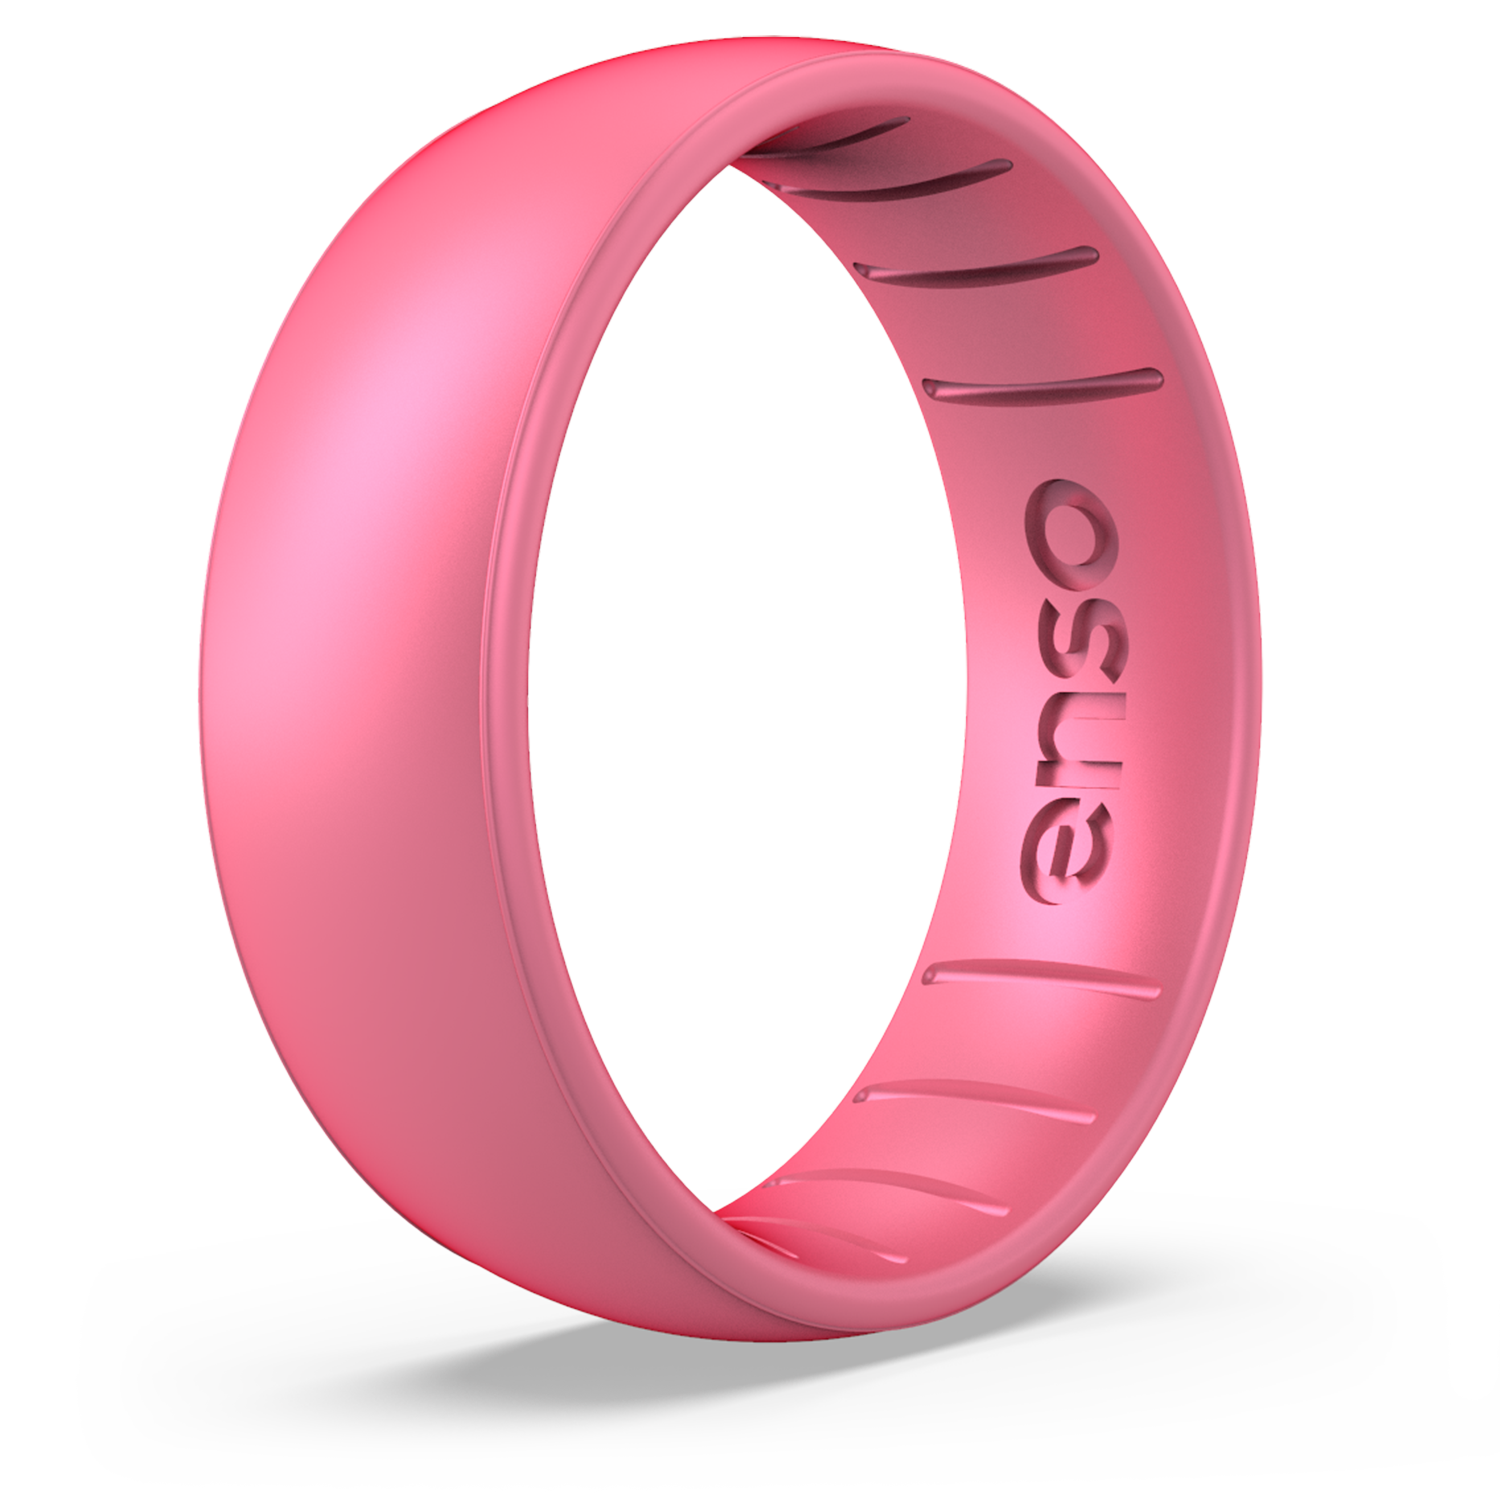 Enso Rings Classic Legends Series Silicone Ring - Mermaid - 12